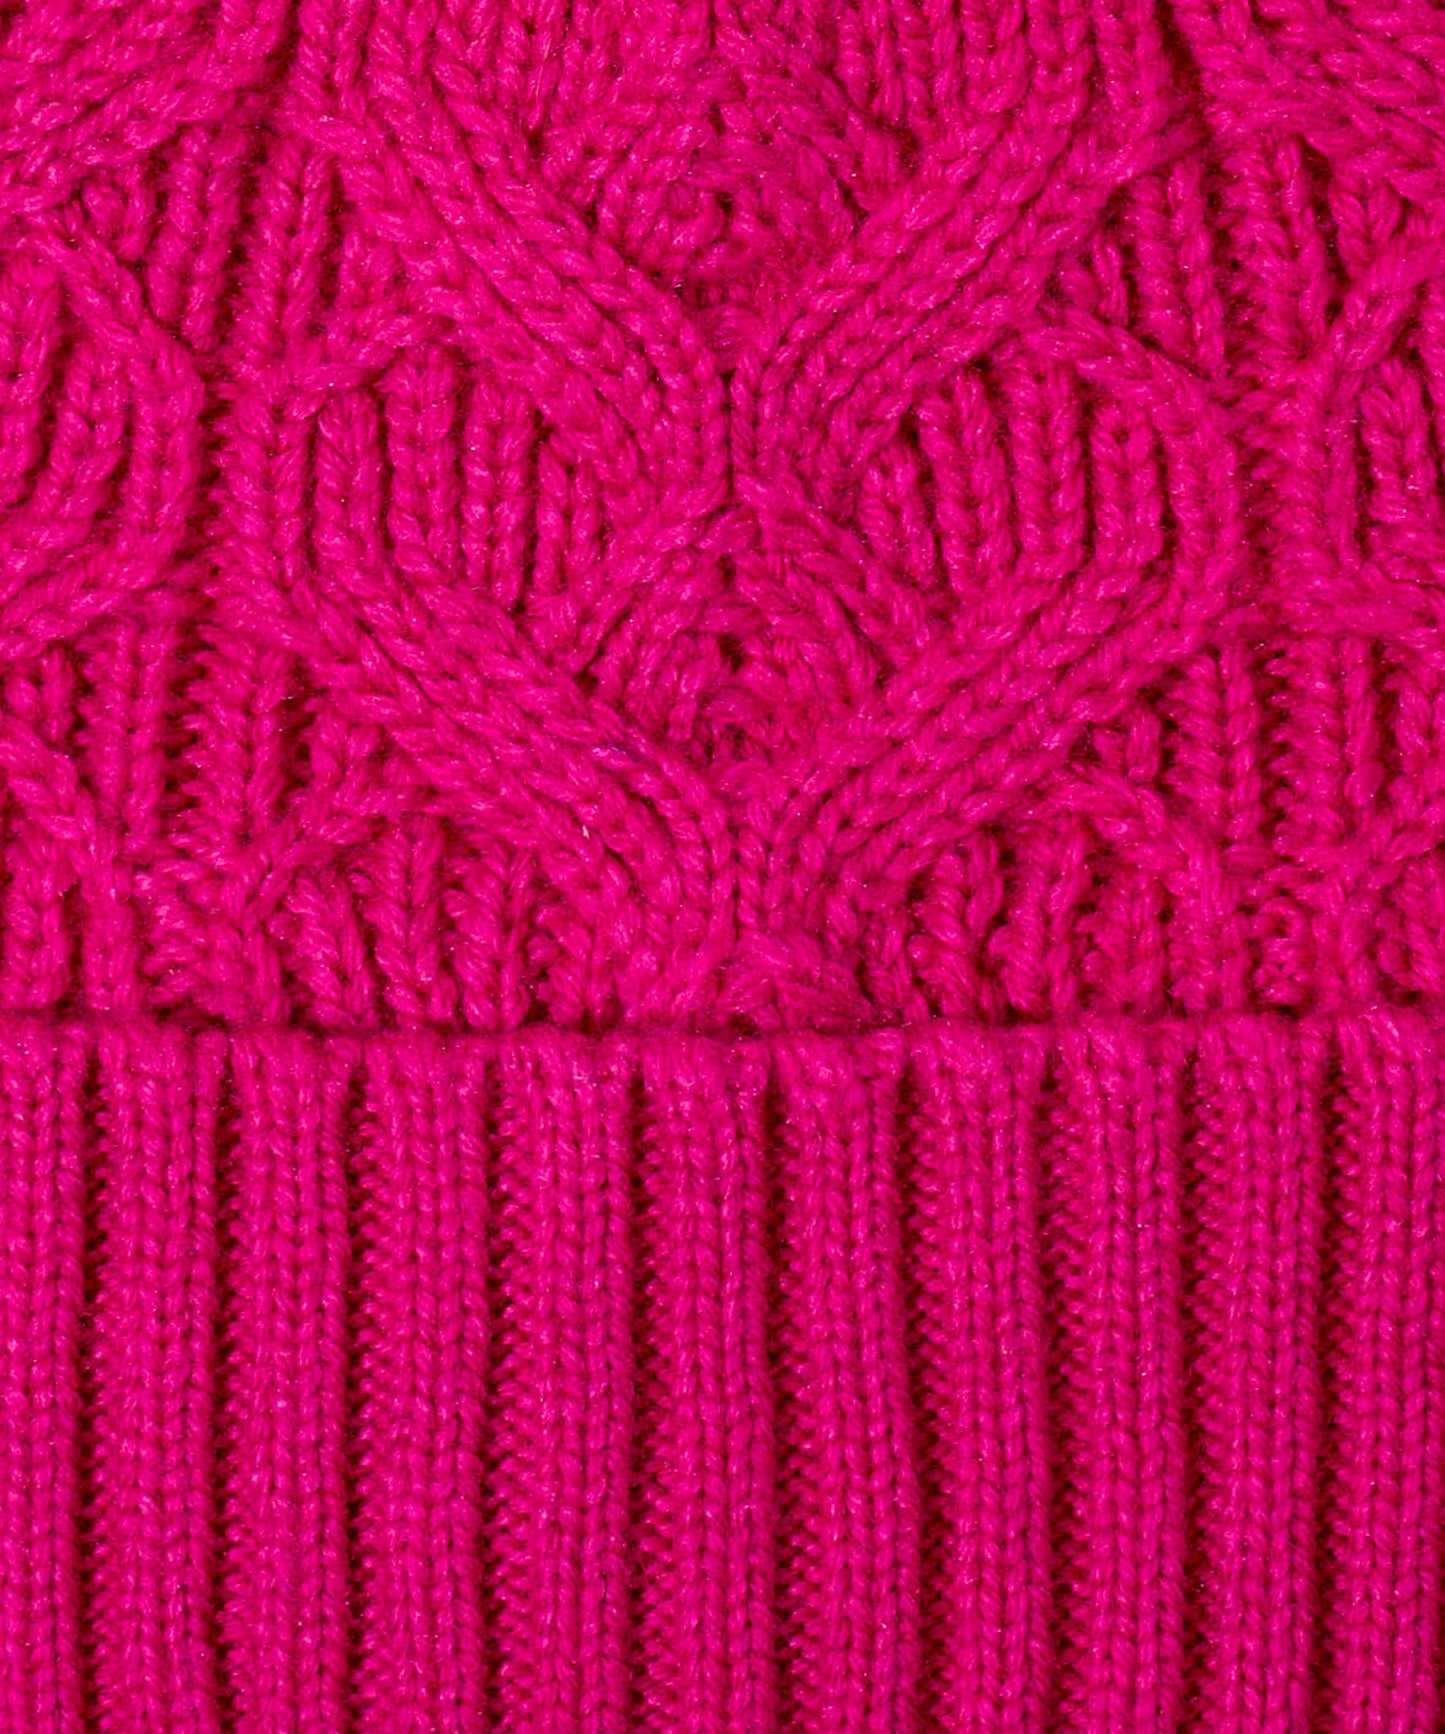 Loopy Cable Pom Hat in color Electric Pink